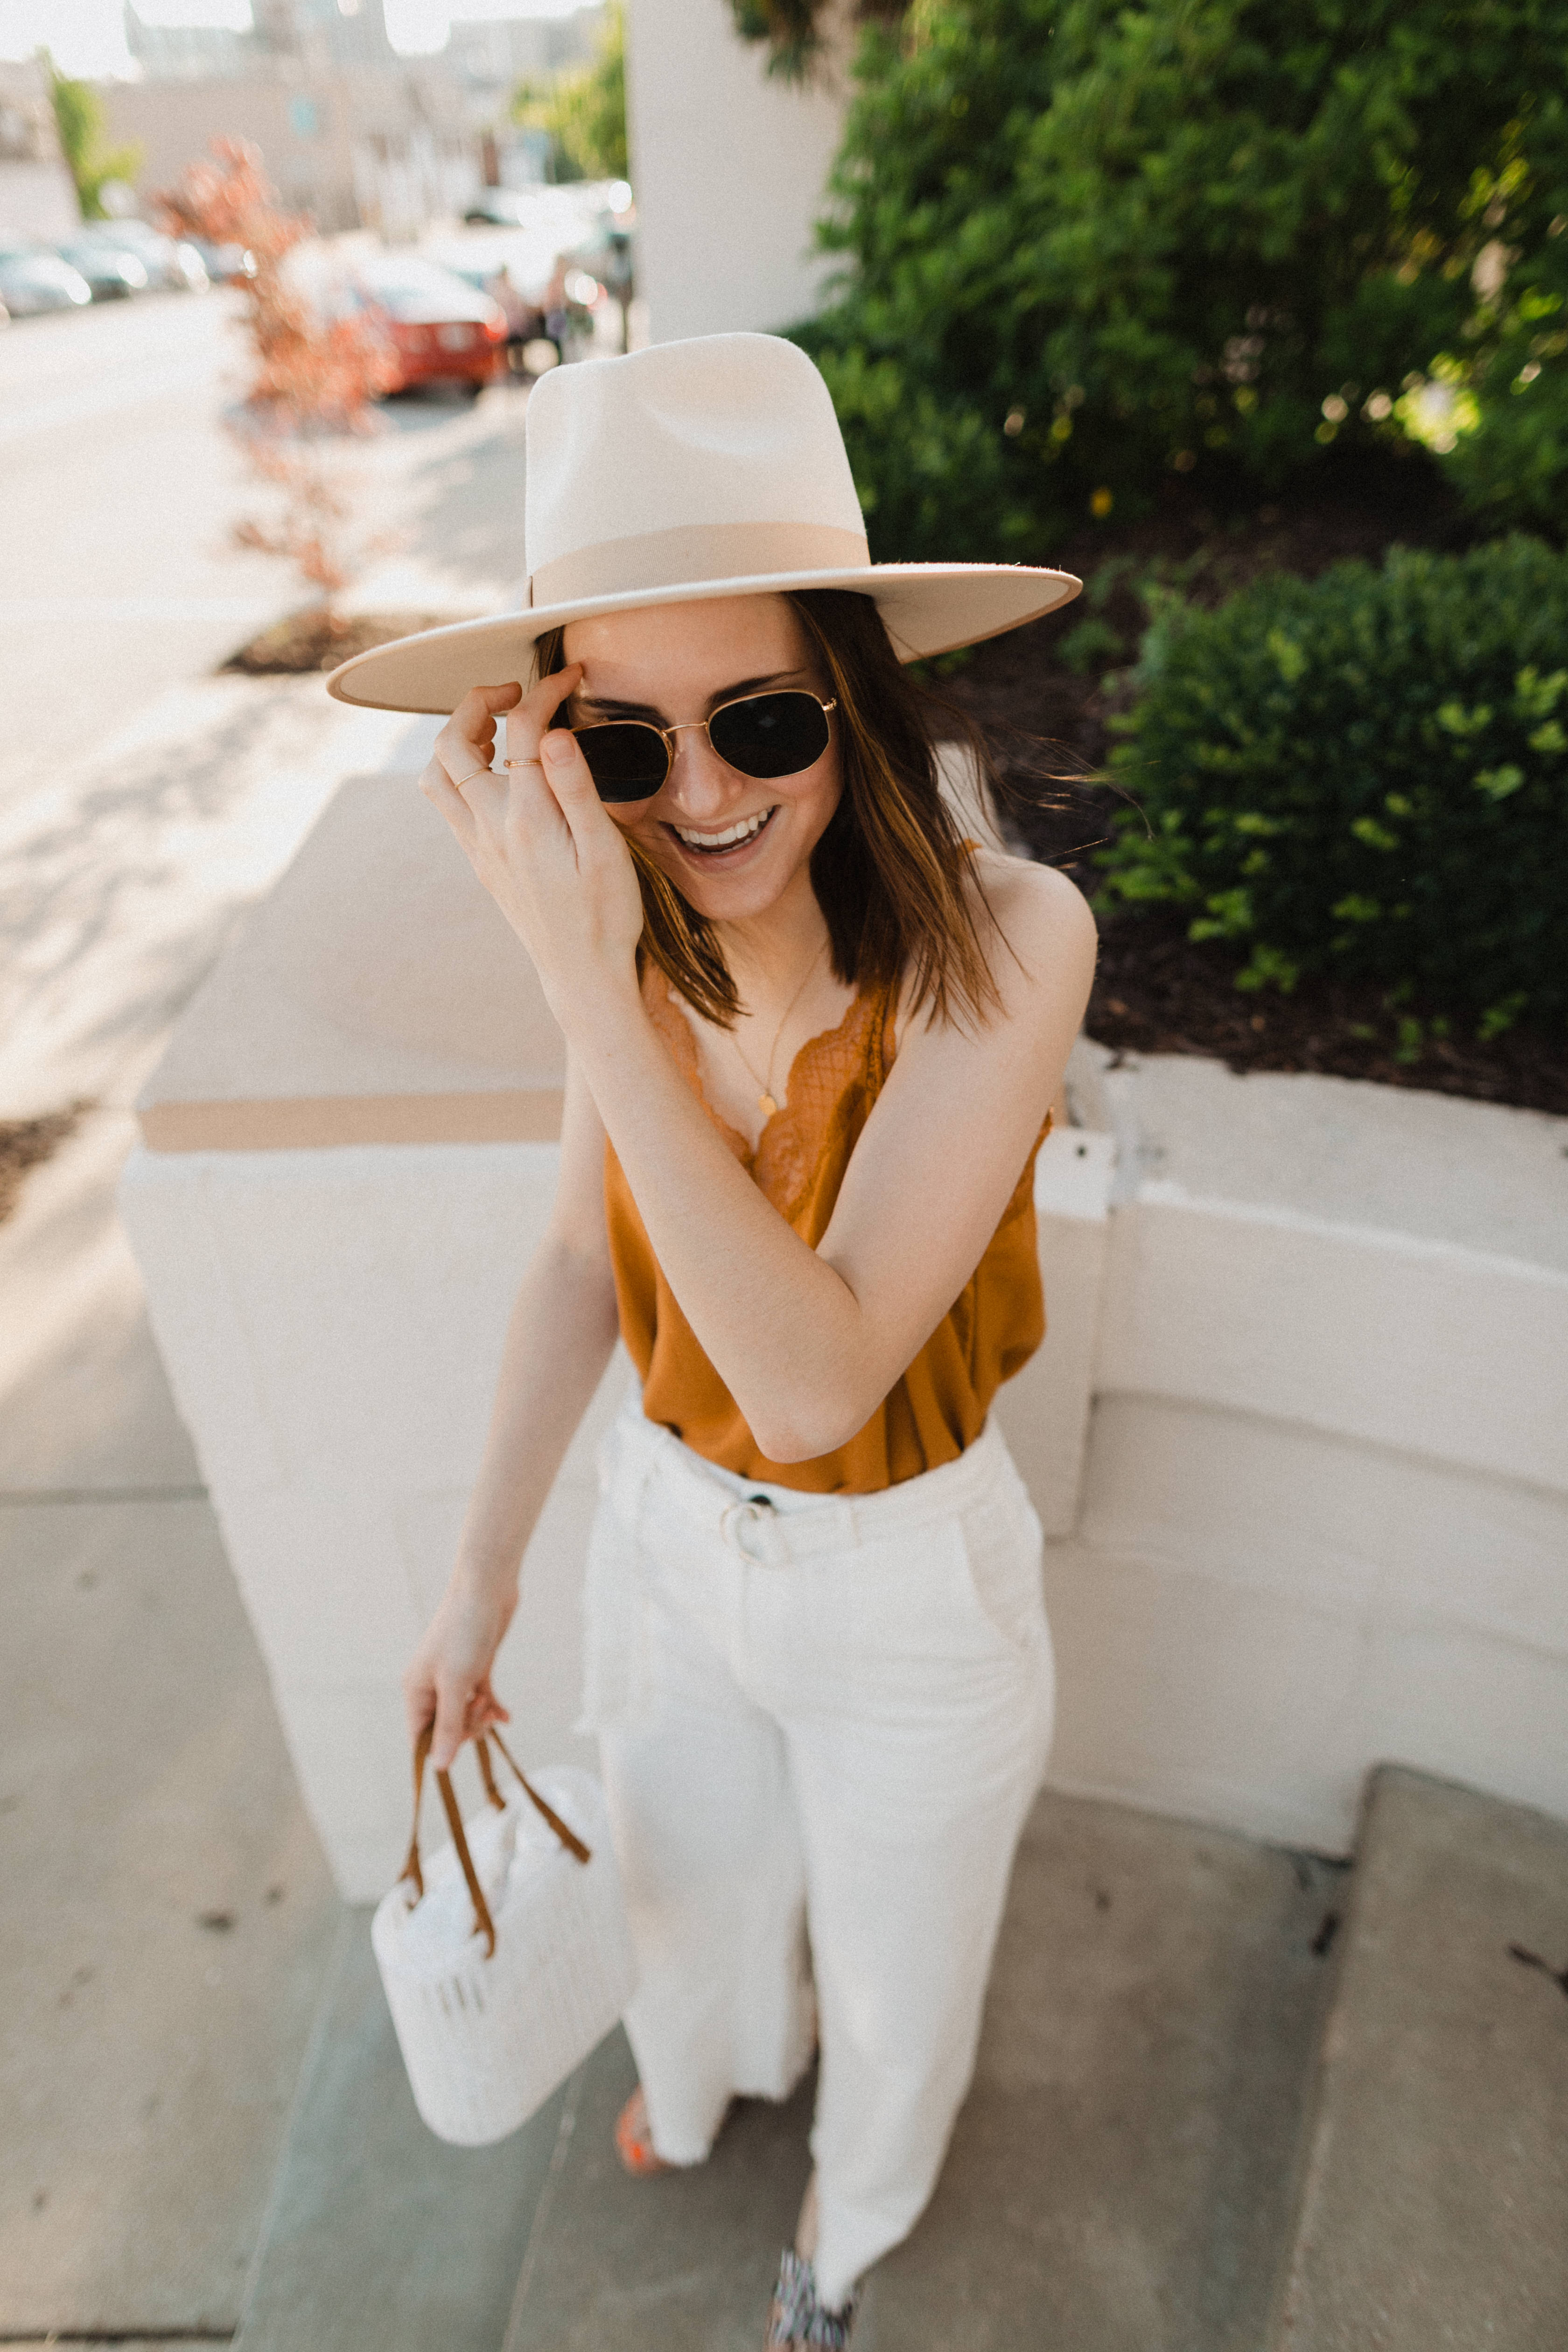 Lovestitch Clothing: 7 Outfits To Wear This Summer | white pants outfit | white pants outfit summer | white pants outfit spring | linen pants outfit | linen pants outfit summer | summer outfit ideas easy | summer outfit ideas casual | Oh Darling Blog